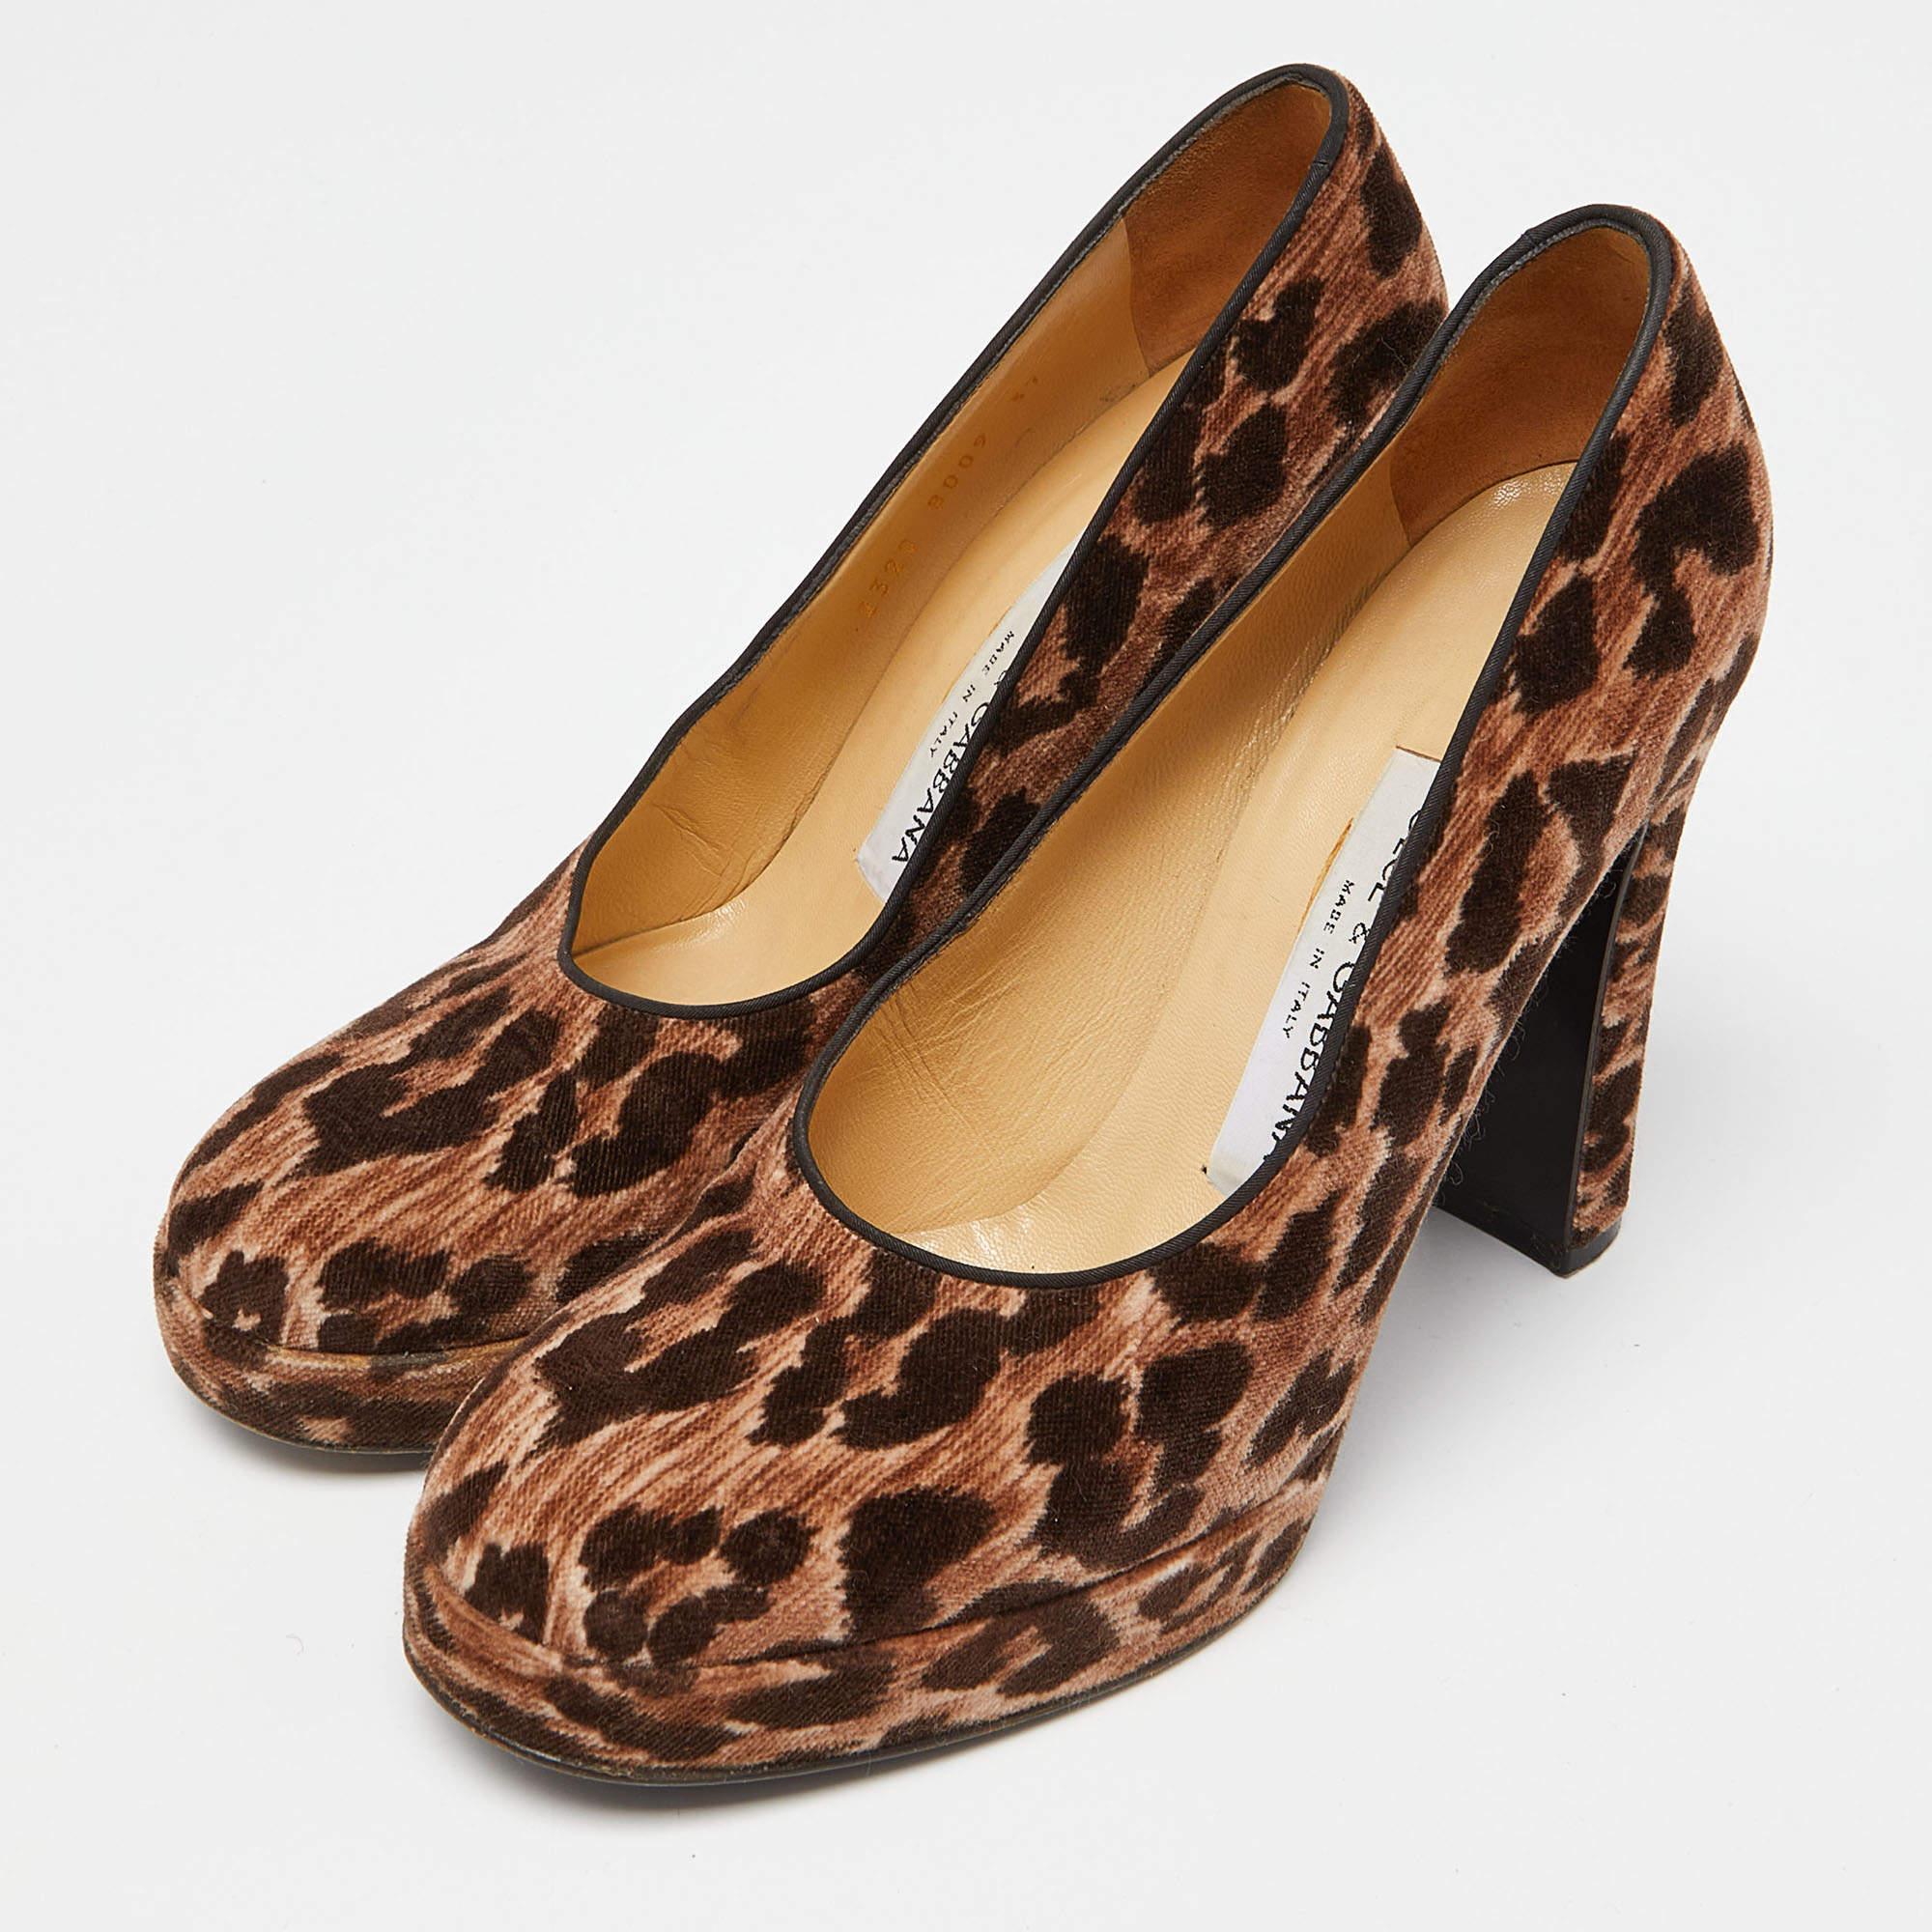 Dolce and Gabbana never fails to impress and these brown pumps aptly justify that! They are crafted from leopard-printed velvet. They come with equipped with comfortable leather lined insoles and 11.5cm block heels. This is one pair you definitely